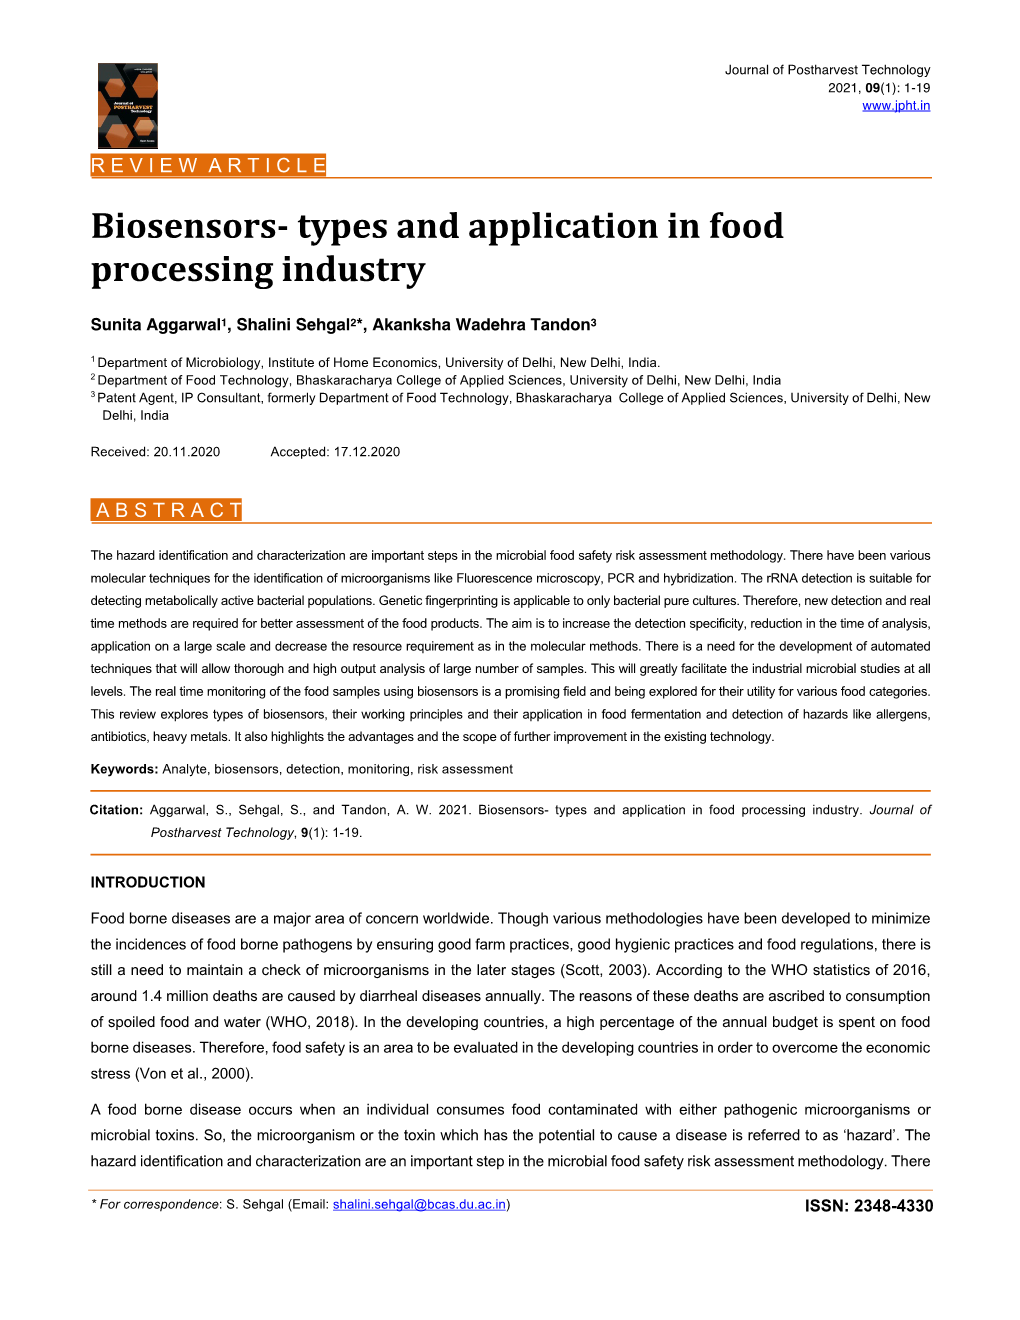 Biosensors- Types and Application in Food Processing Industry